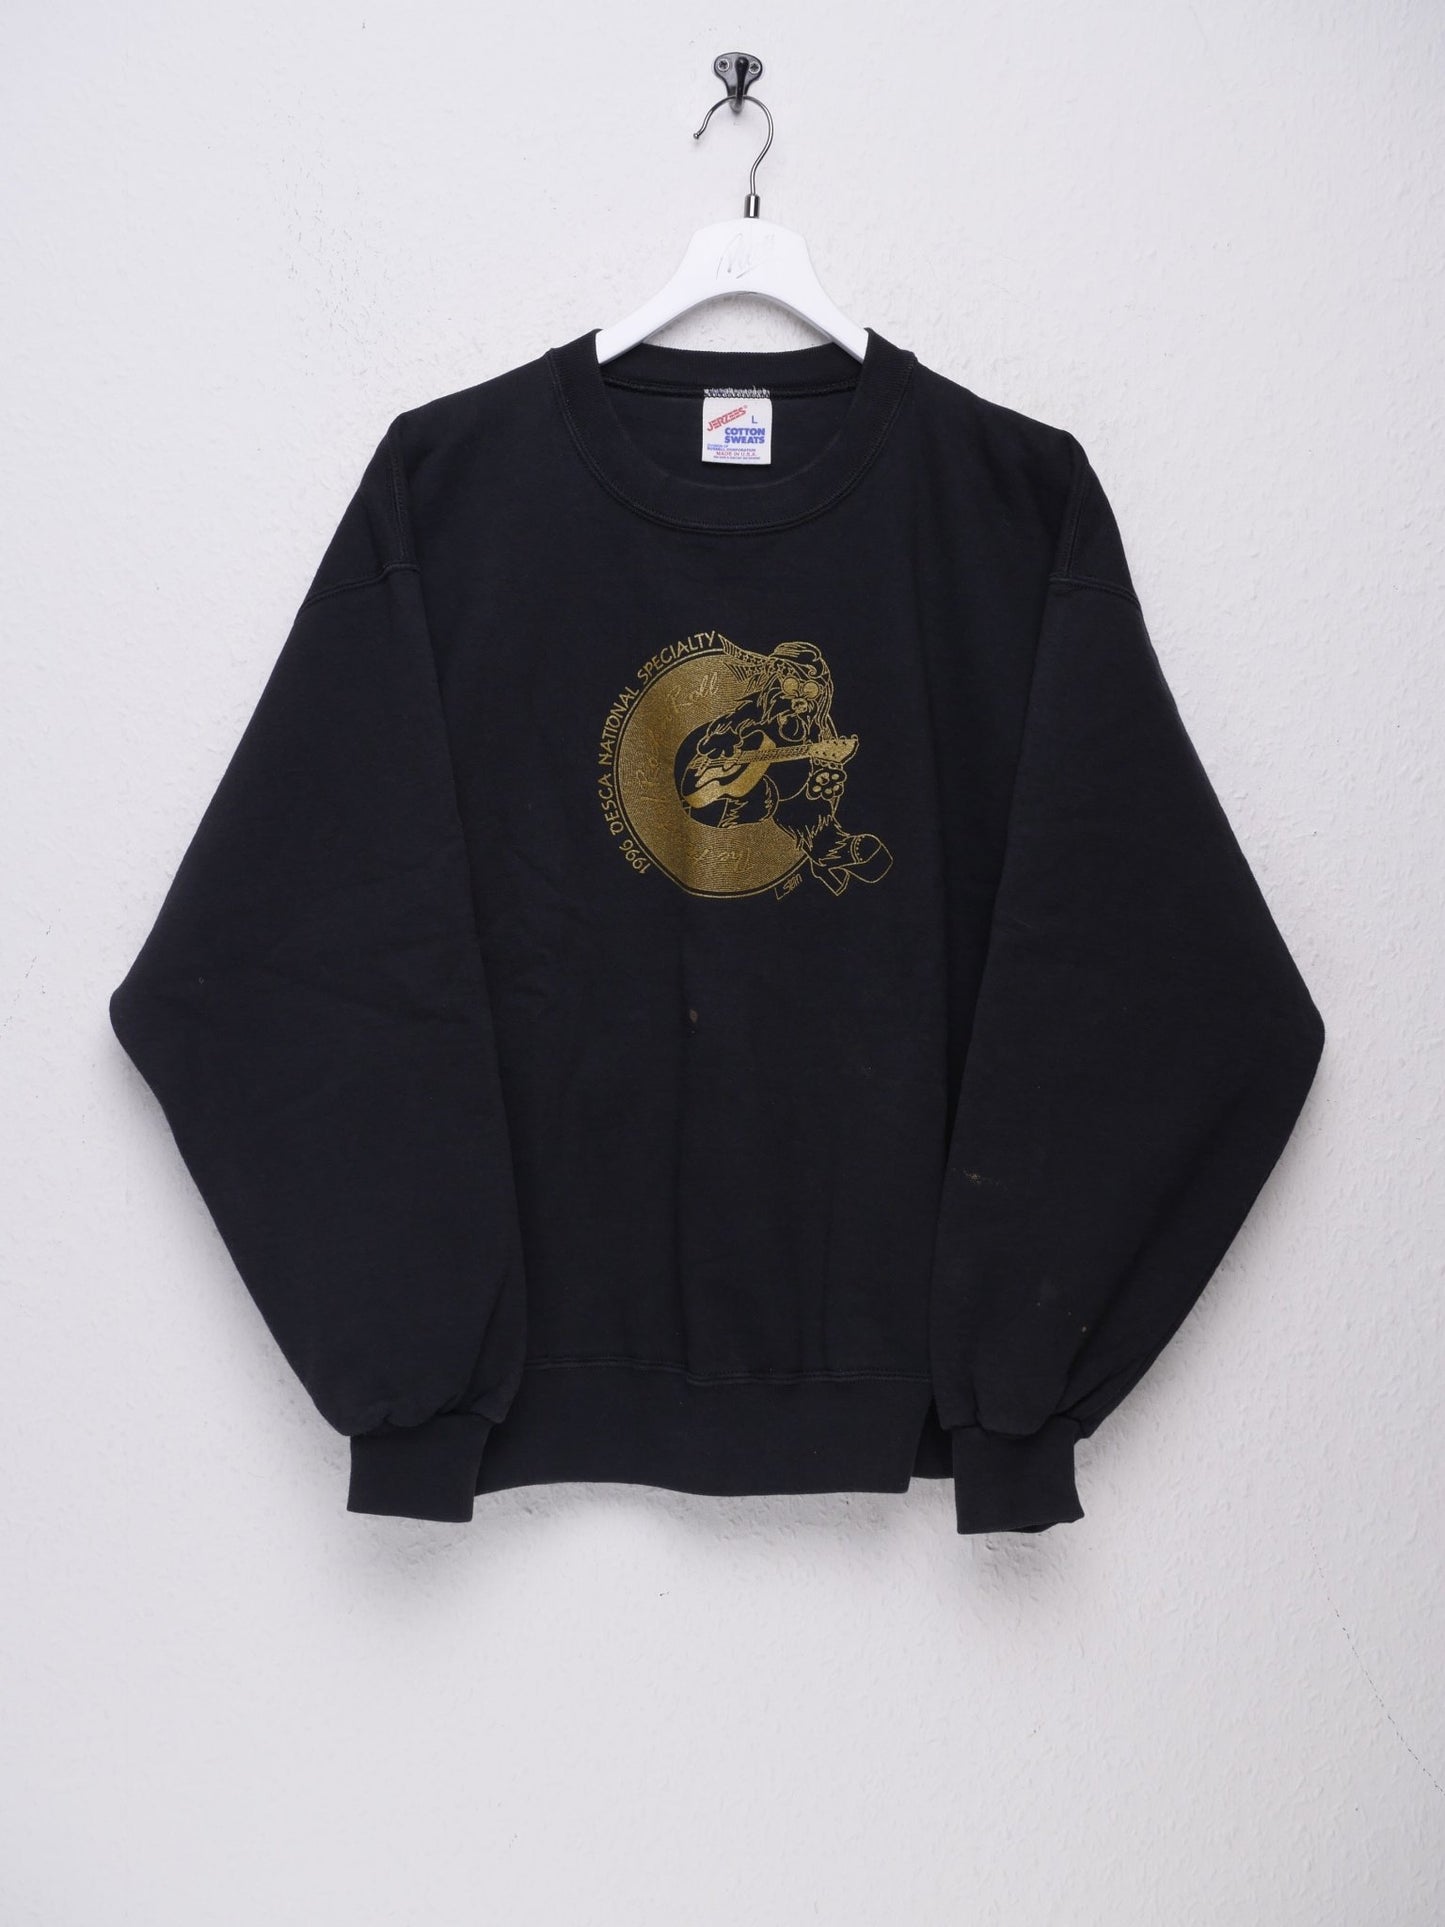 'OESCA National Specialty' printed Graphic black Sweater - Peeces